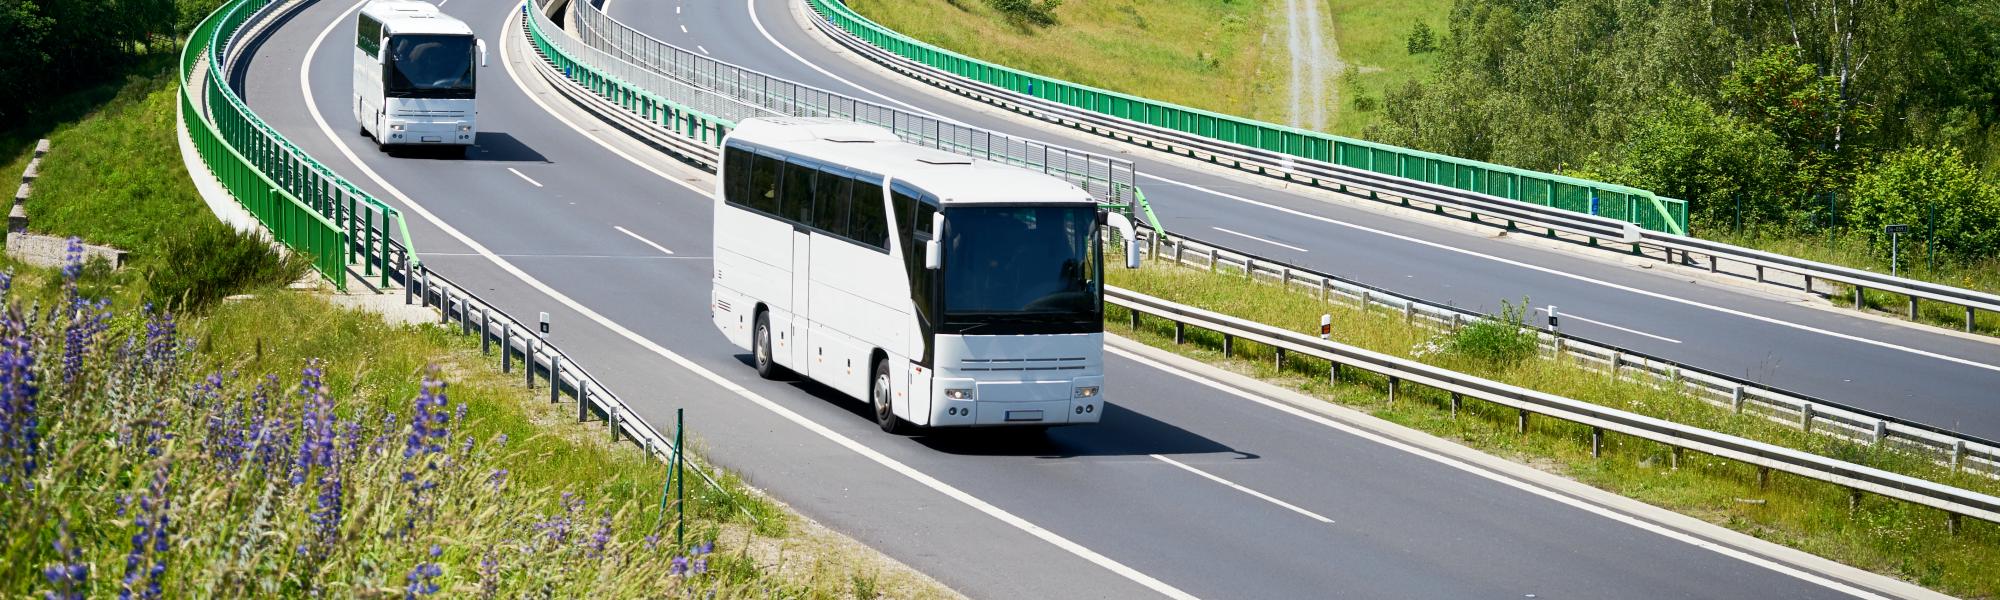 Sustainable mobility requires more bus and coach transport